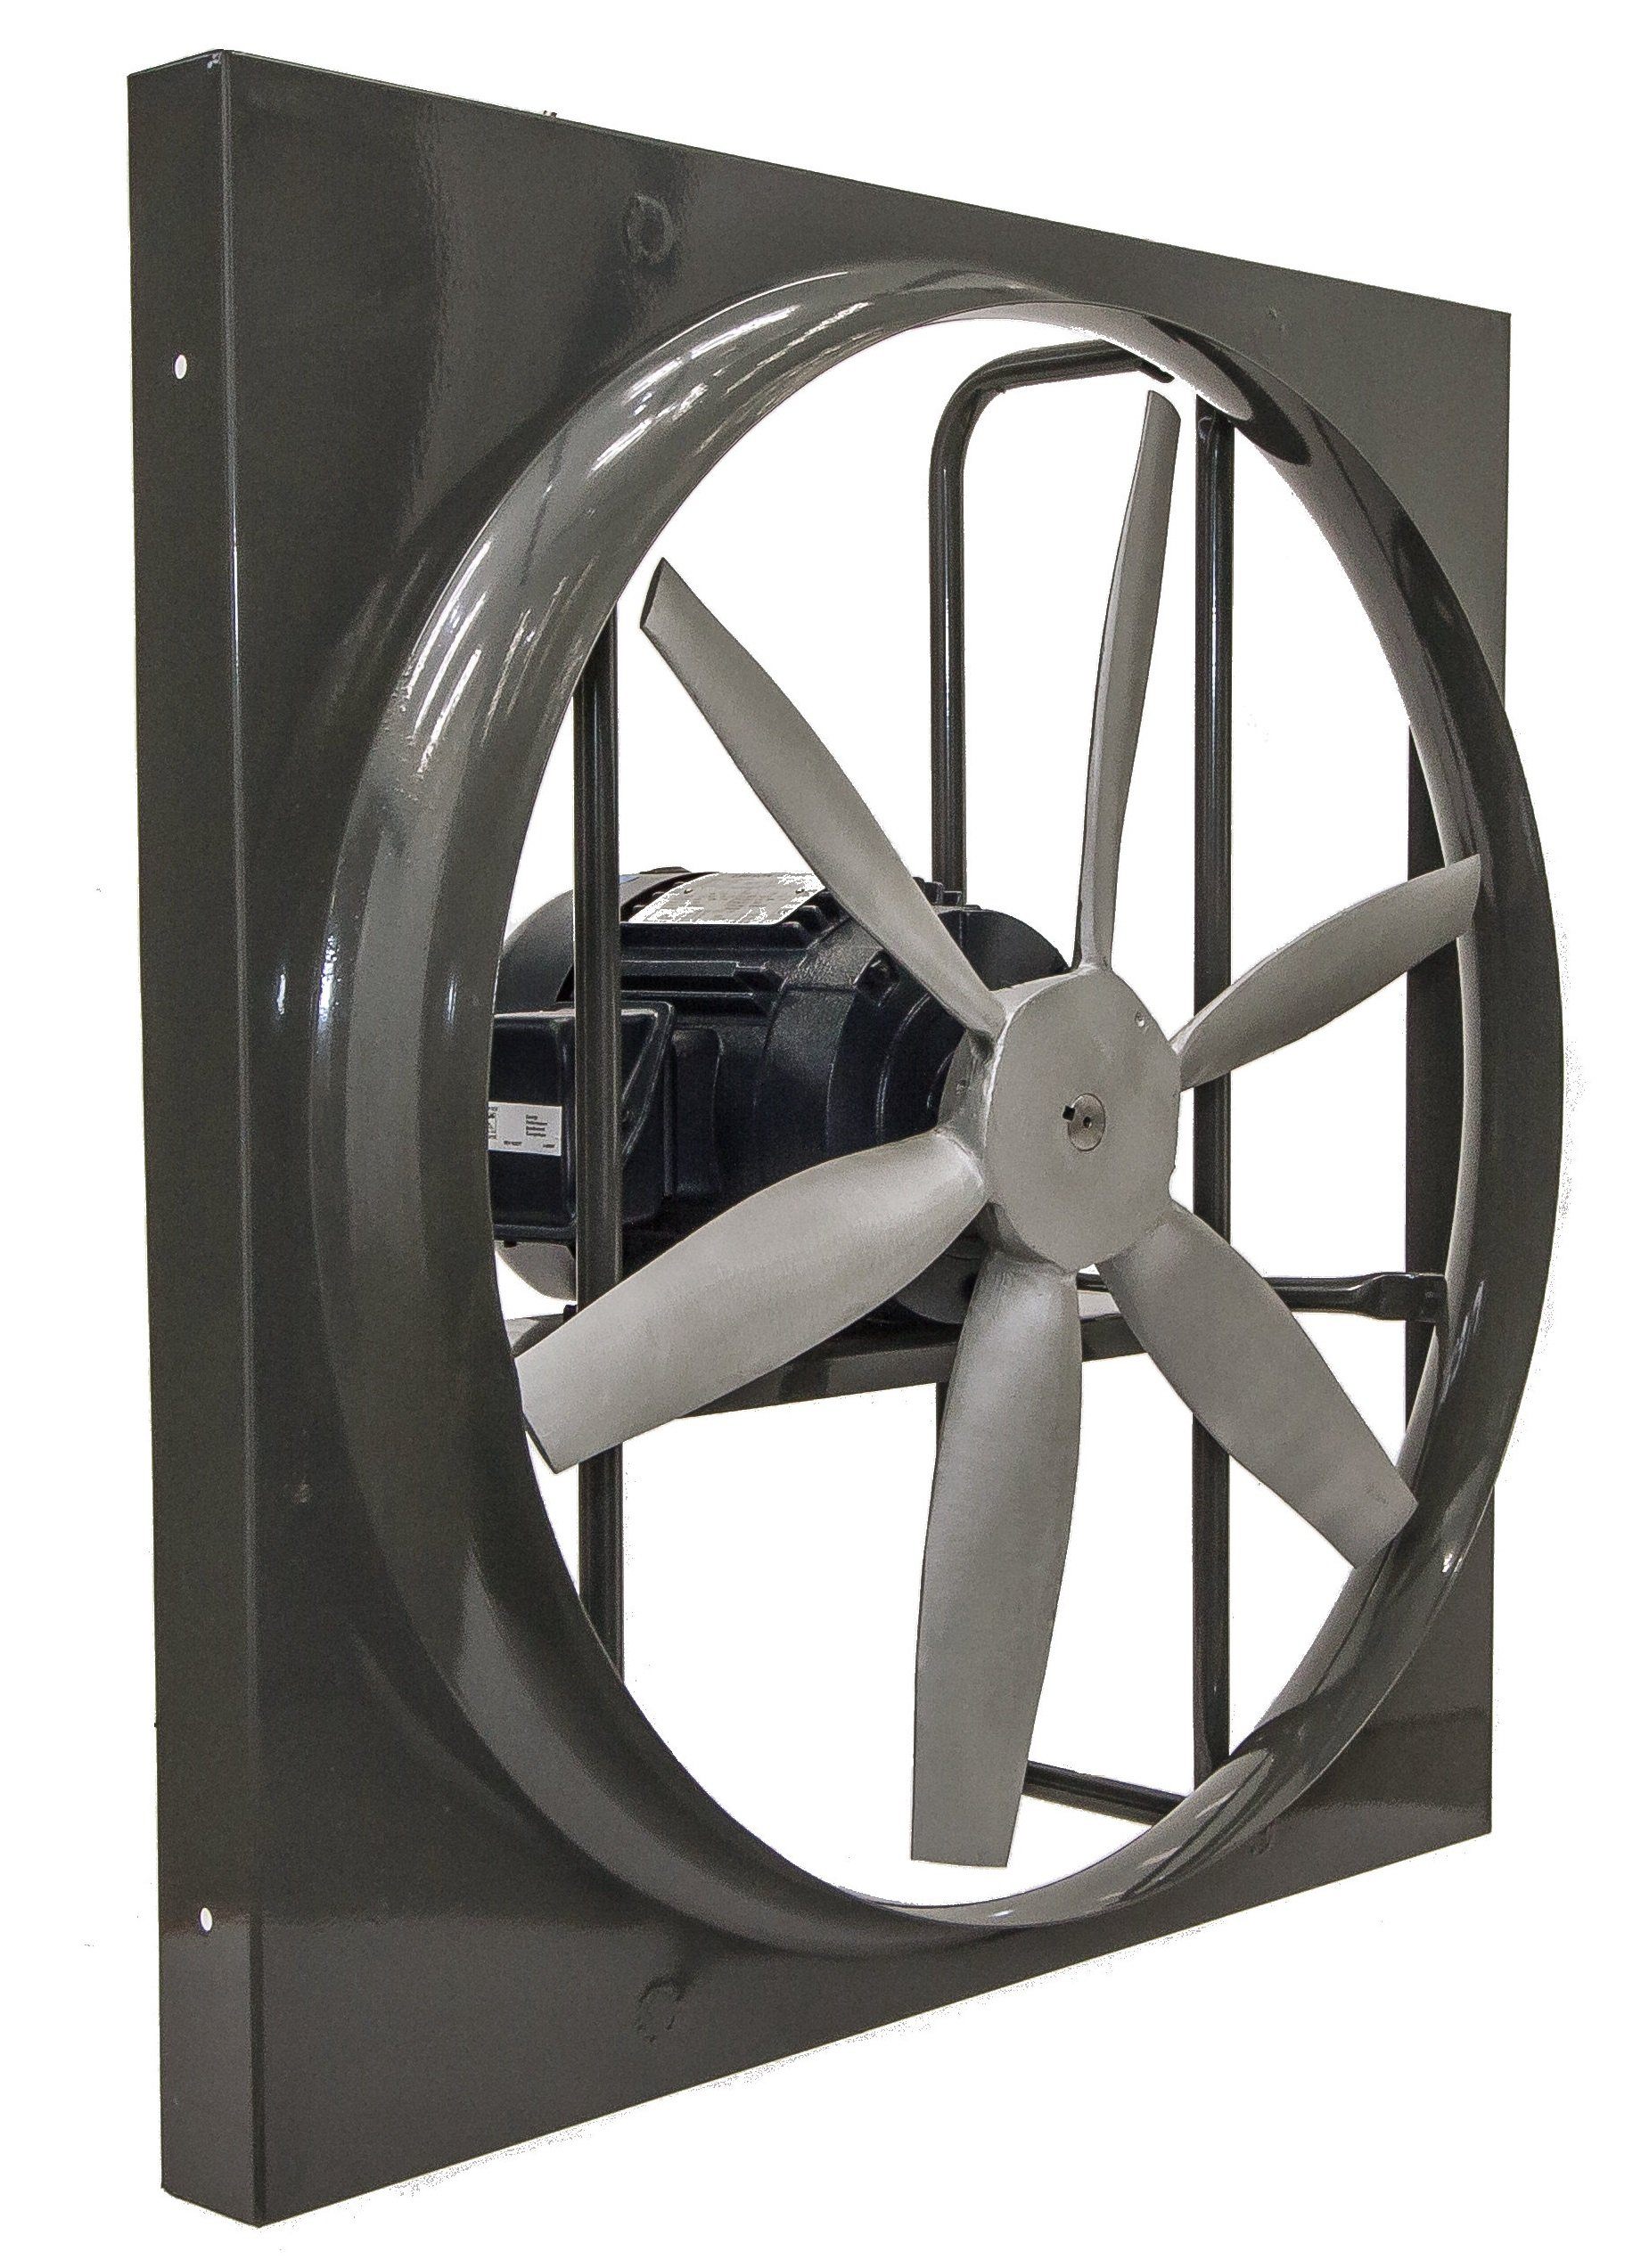 explosion-proof-fans-and-blowers-explosion-proof-panel-wall-supply-fans.jpg